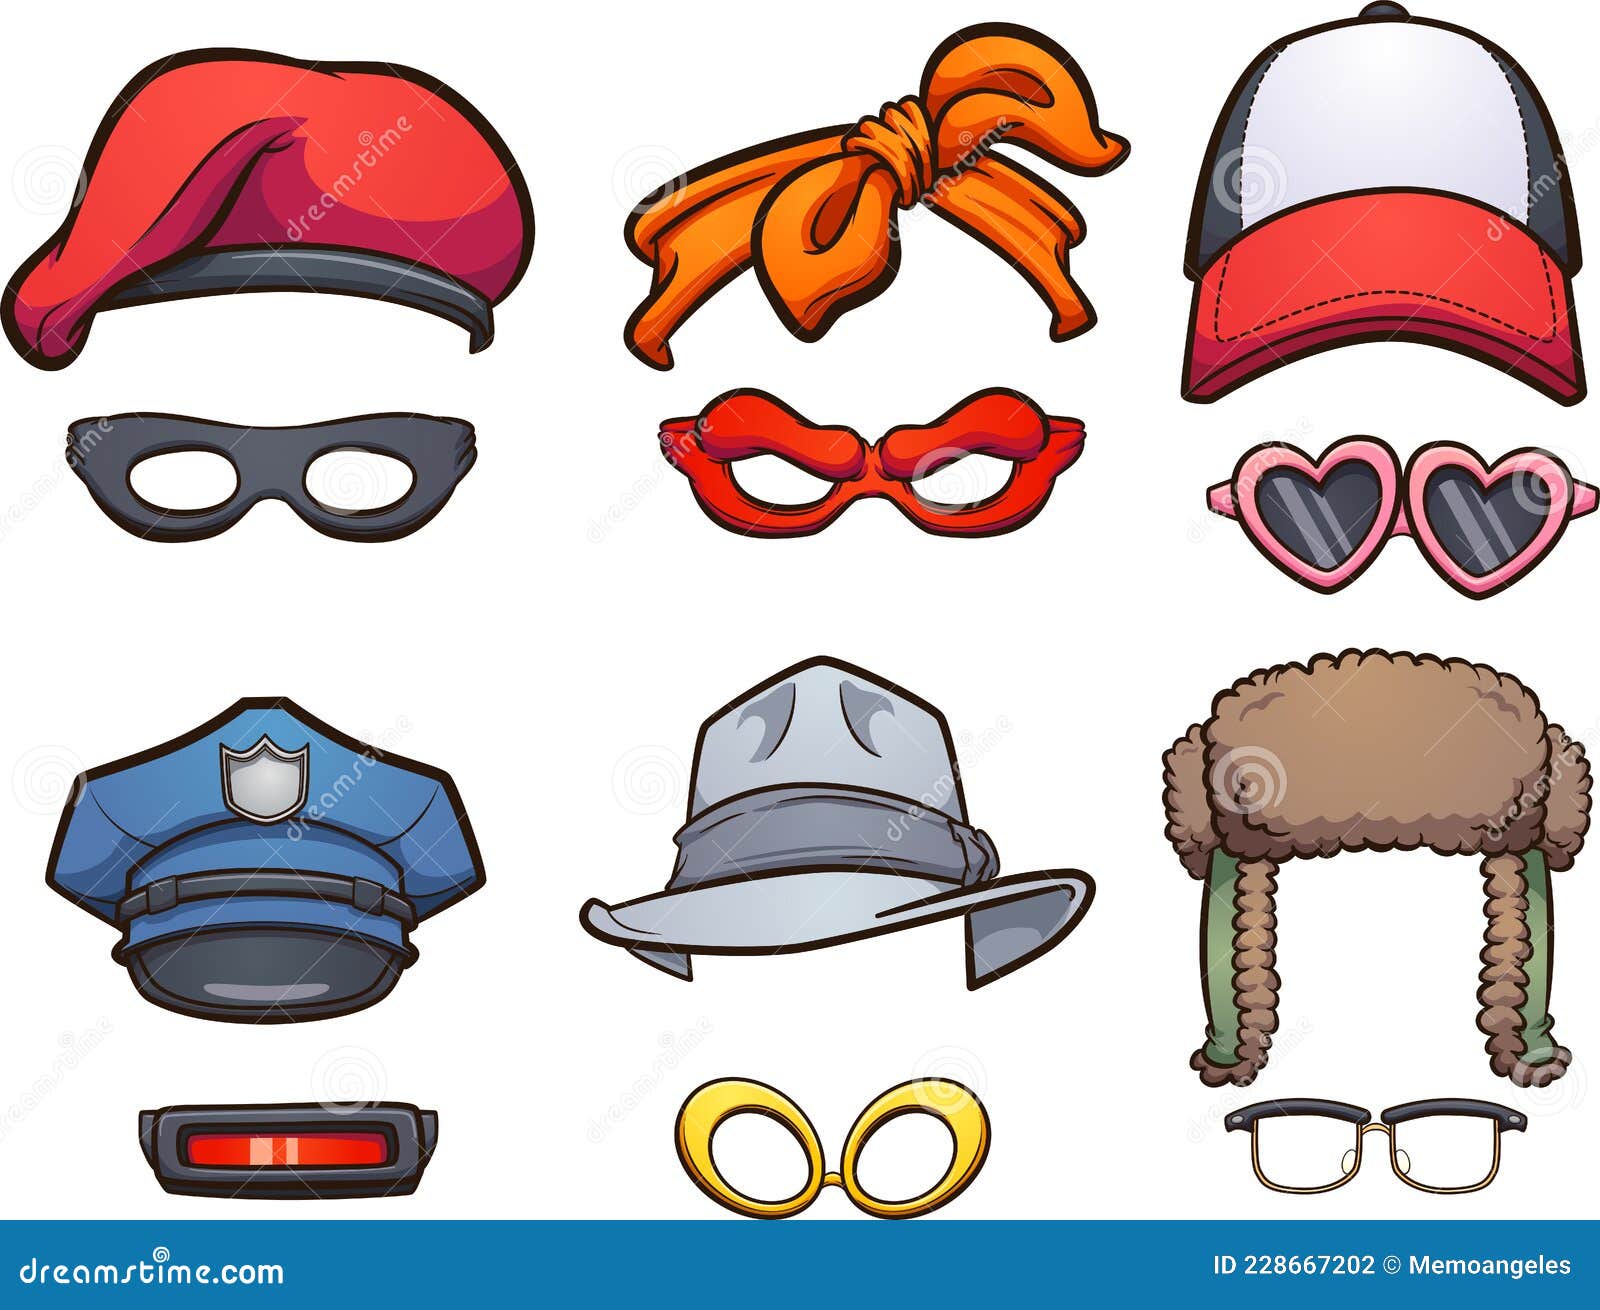 Types of Hats Cloth Accesory Stock Vector - Illustration of object